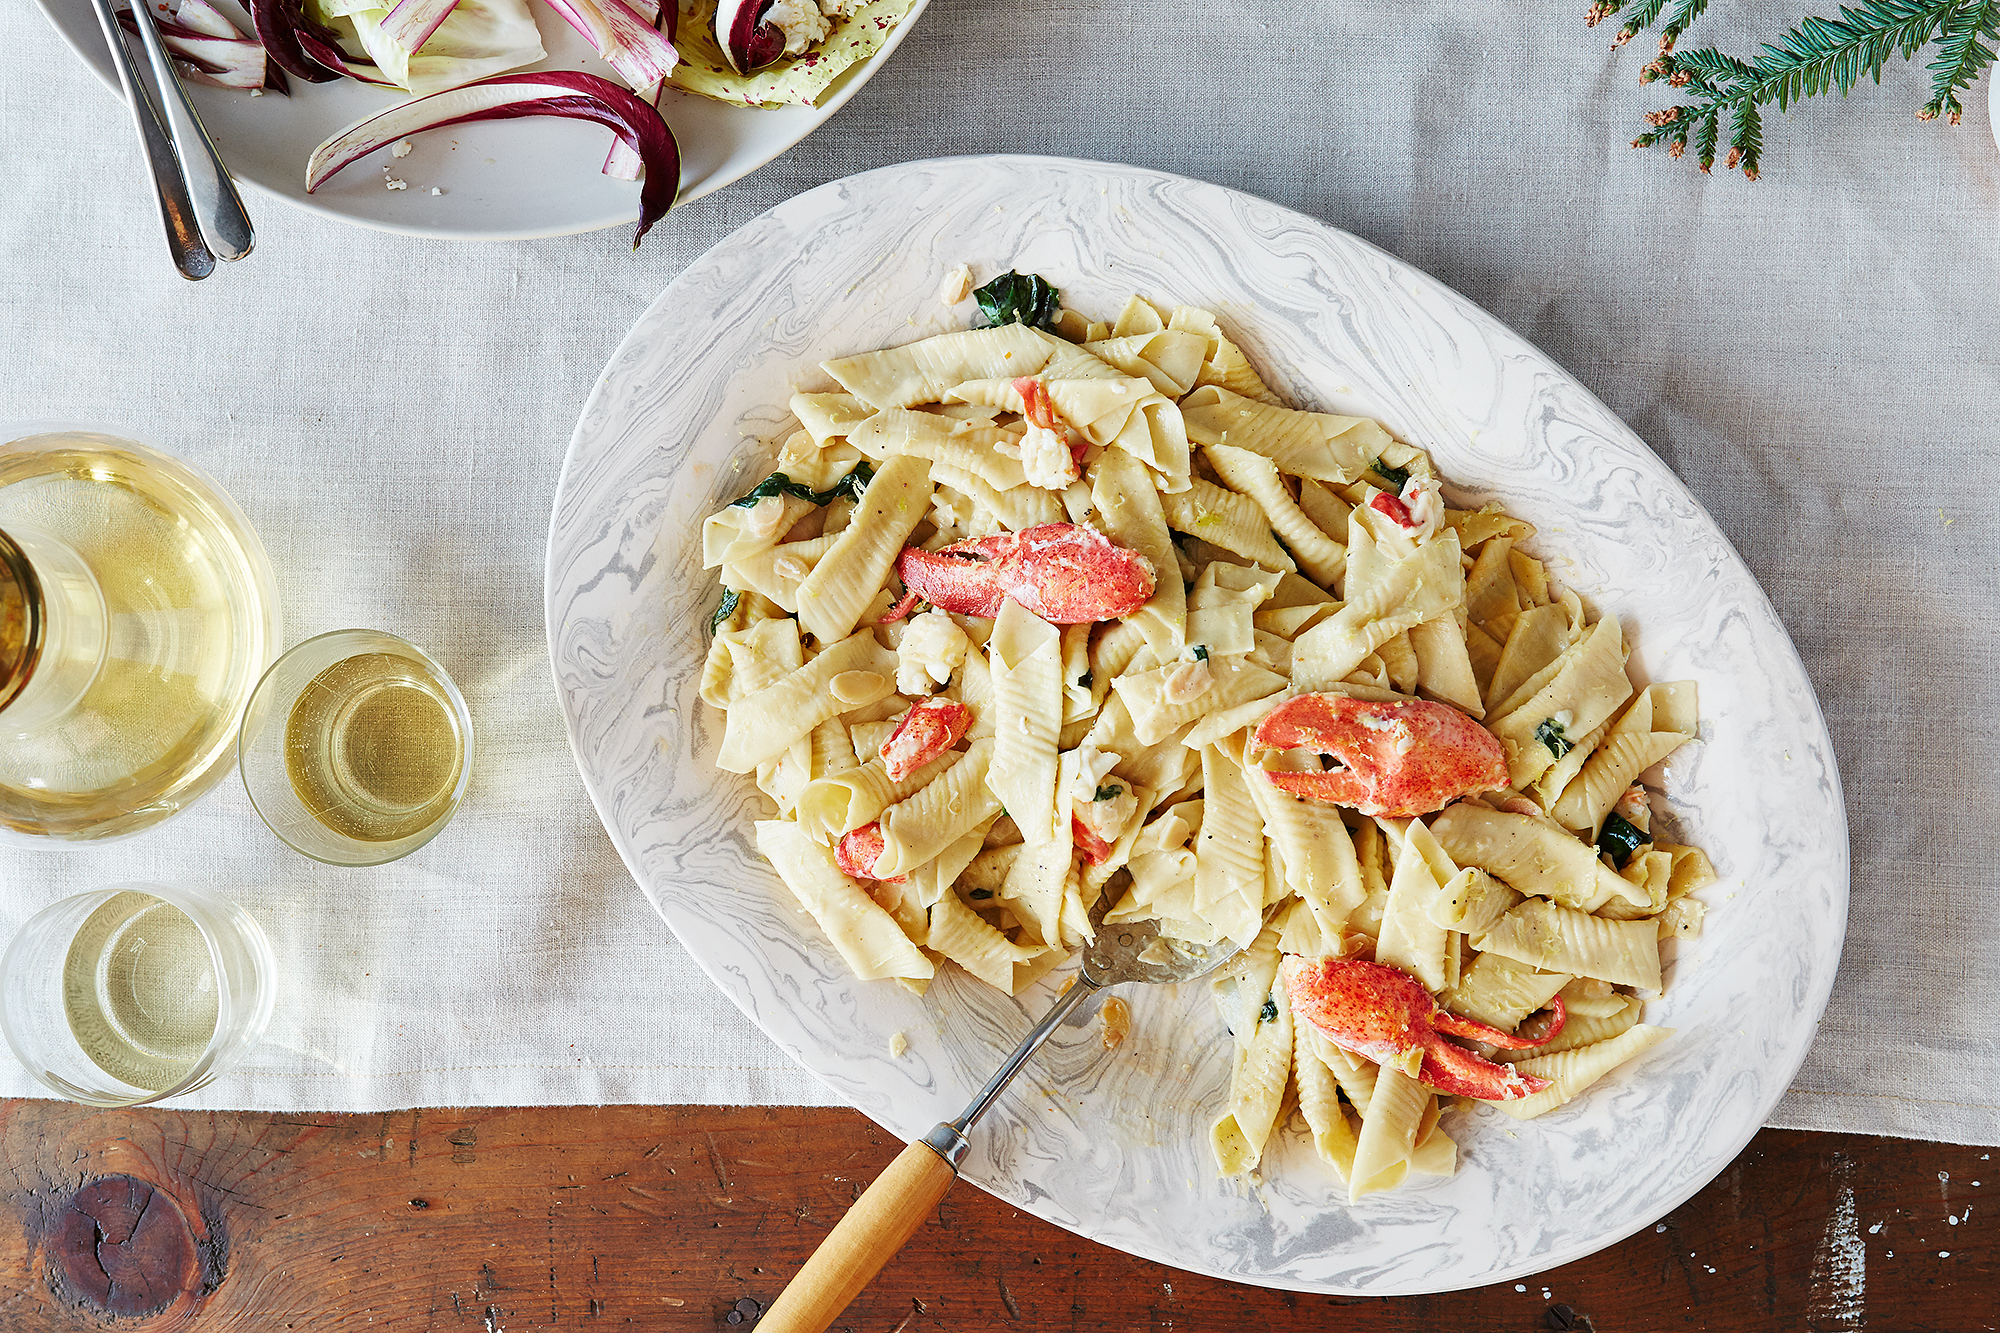 Garganelli with Lobster and Caramelized Fennel Purée